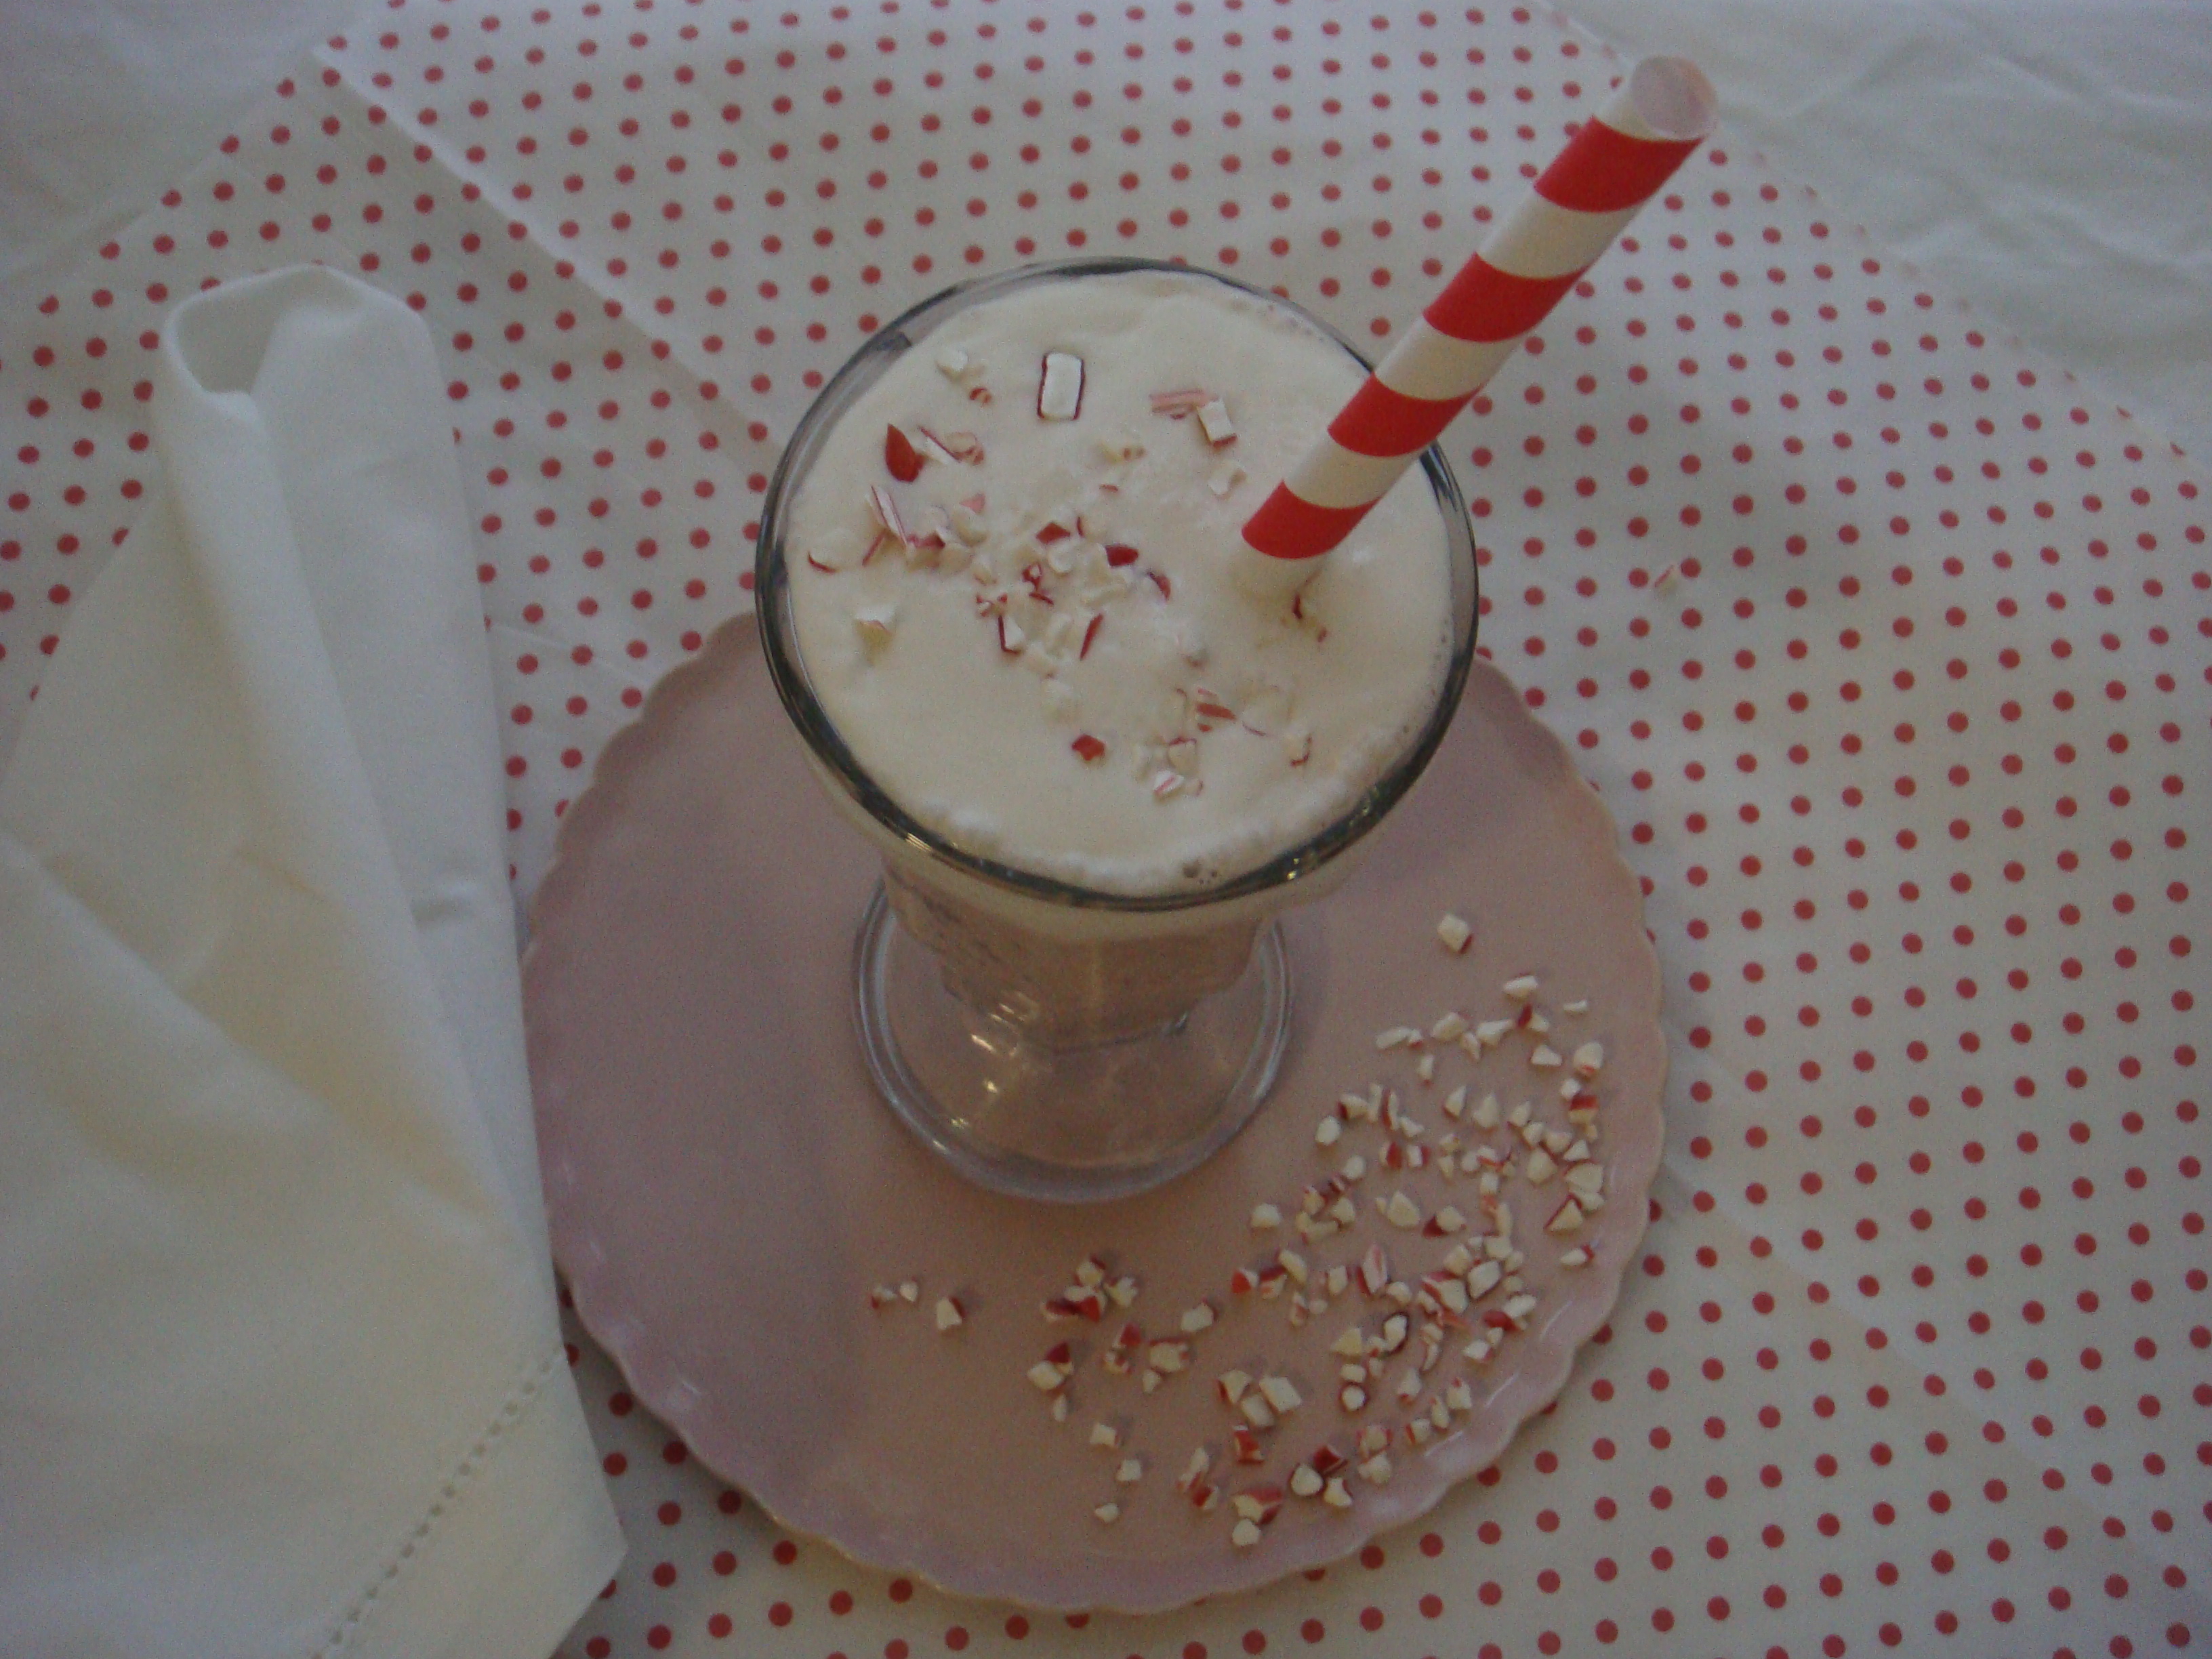 Peppermint Chocolate Chip Shake with whipped cream